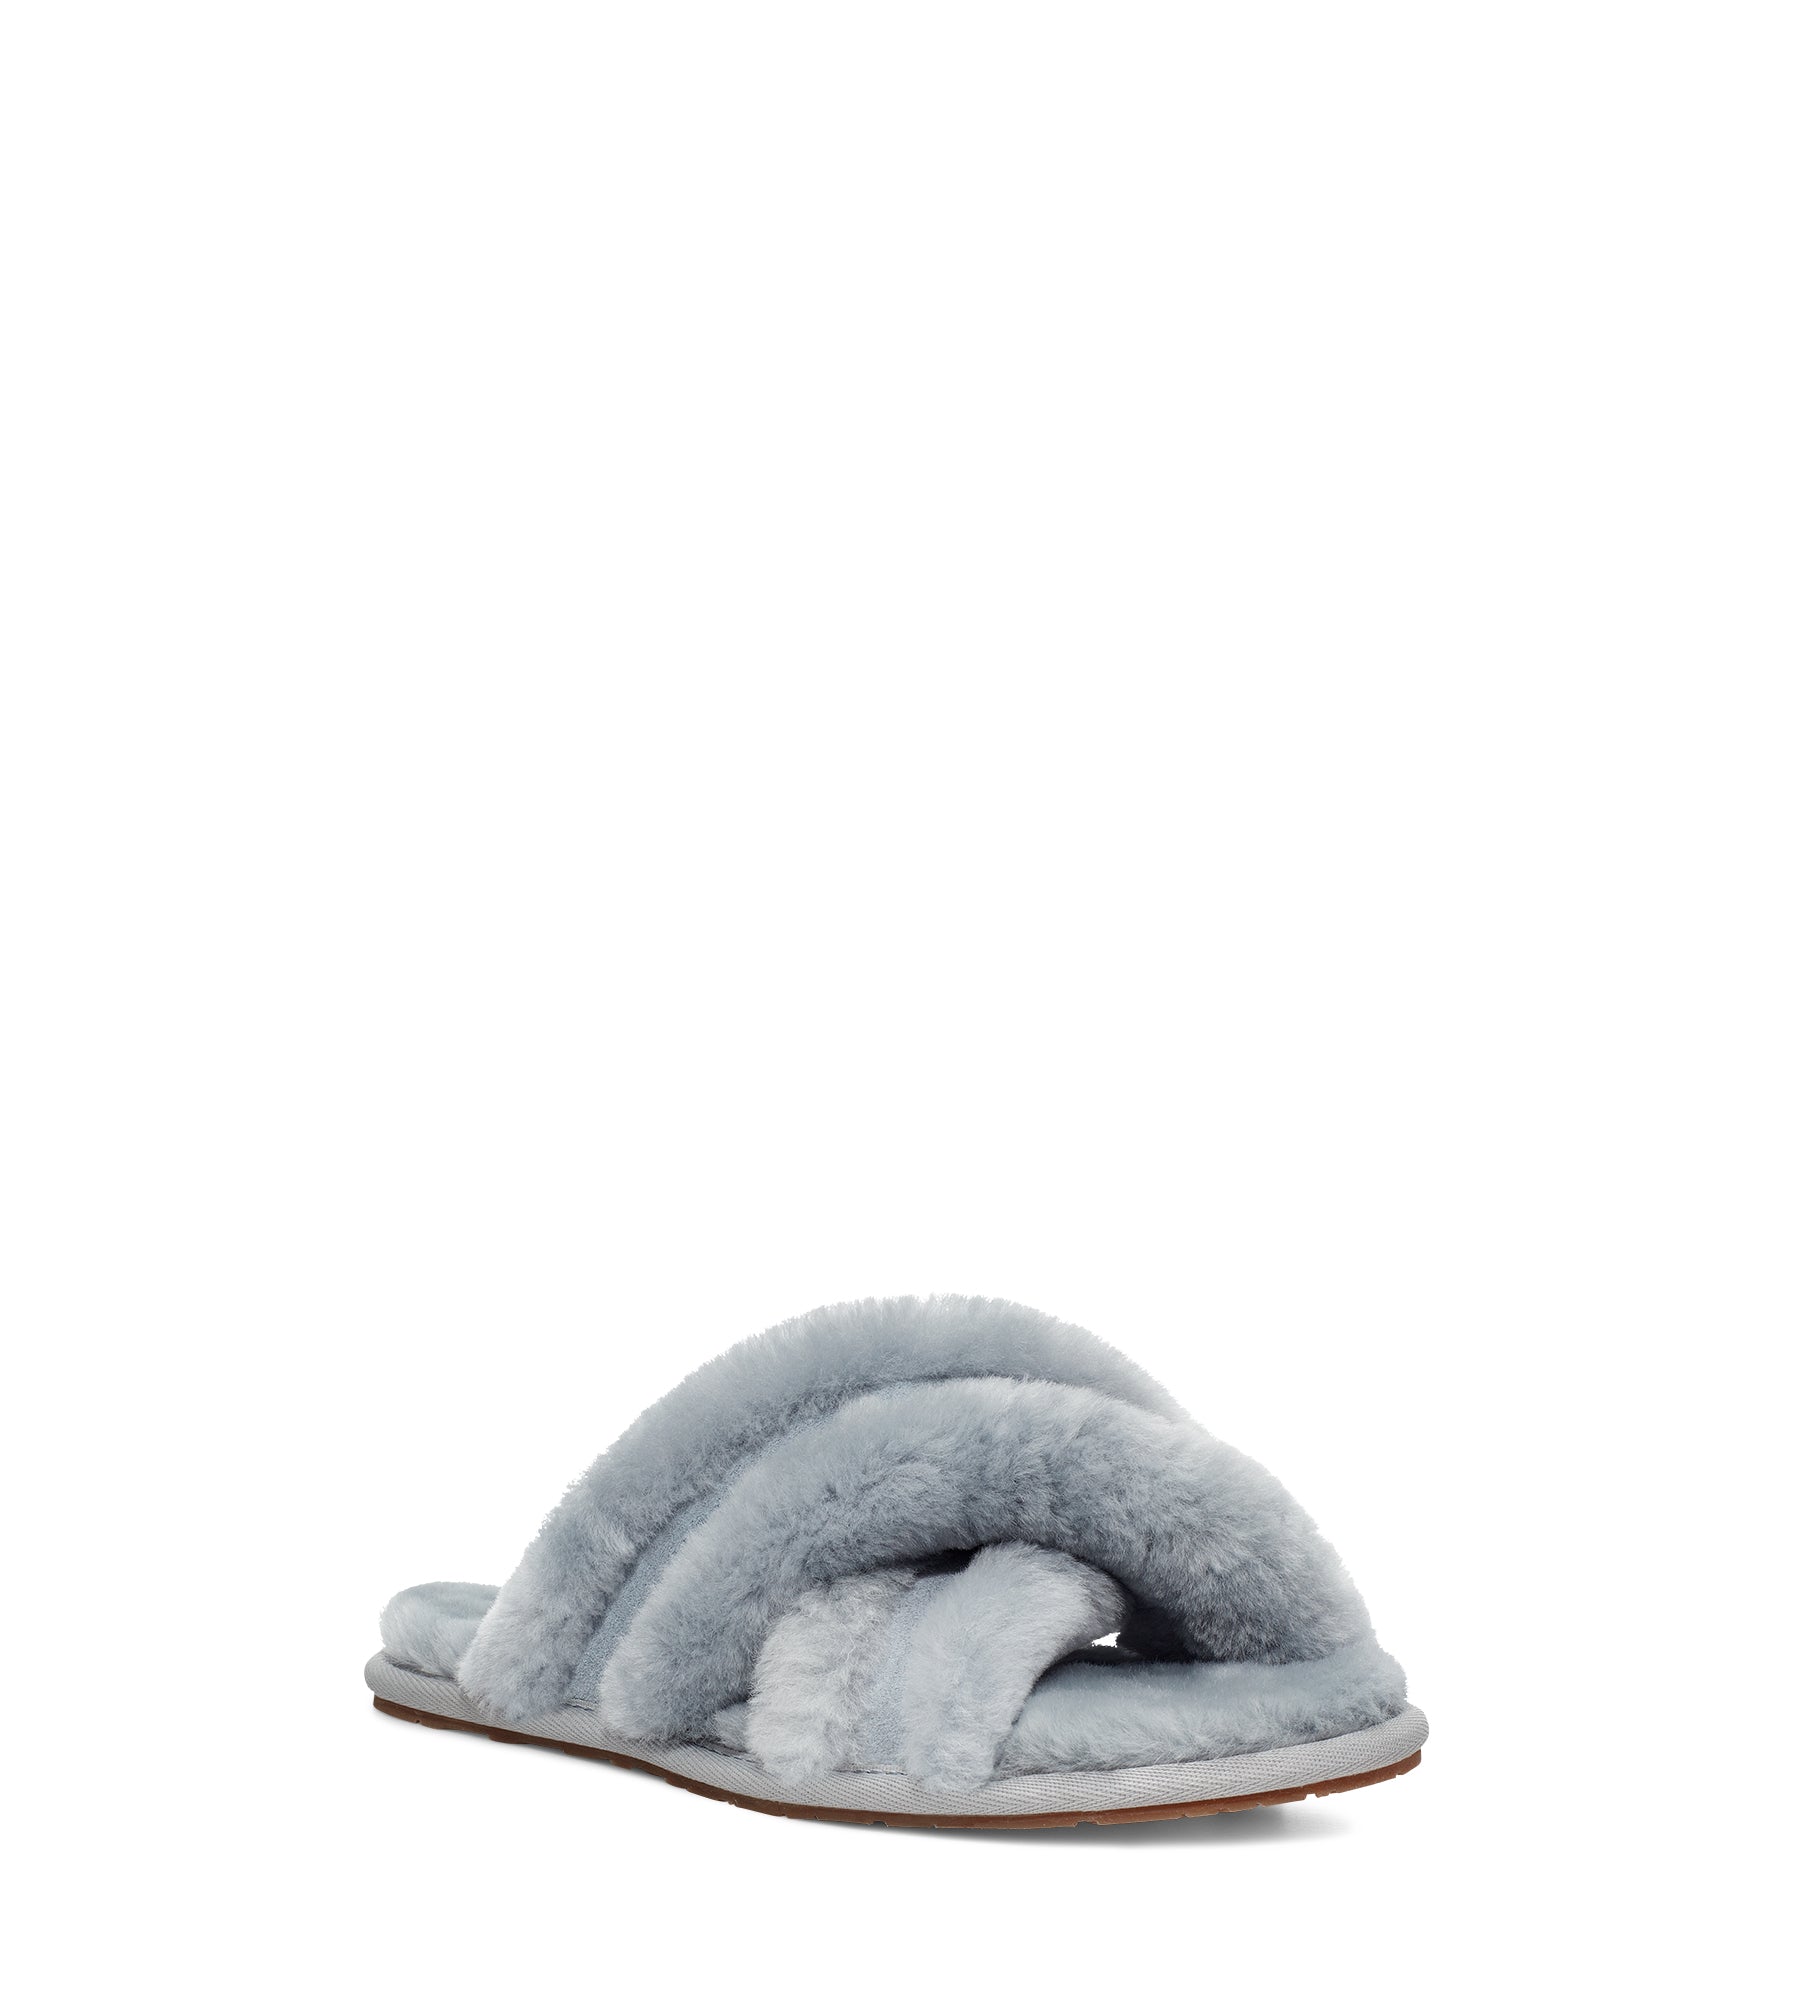 The Women's Ugg Scuffita is a house slipper featuring the same soft sheepskin and a molded rubber outsole of the well know Scuffette. This updated version features fluffy cross-straps and rich suede overlays, it pairs perfectly with robes and loungewear for weekend relaxation.